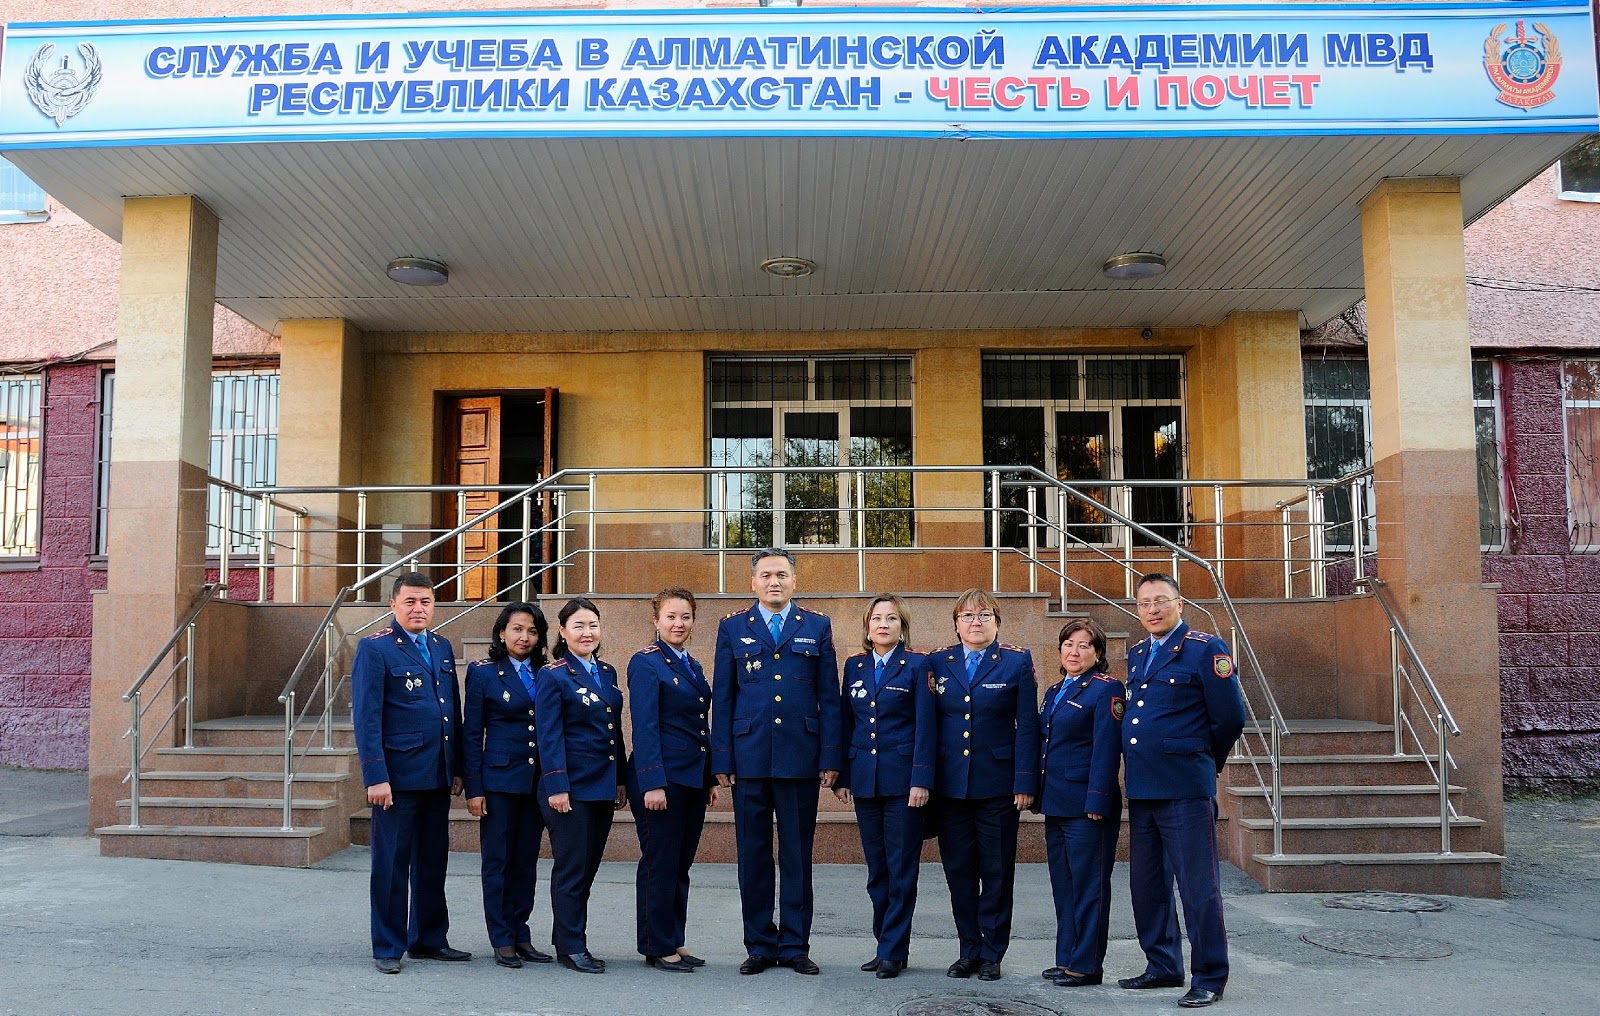 Almaty Academy of the Ministry of Internal Affairs of Kazakhstan